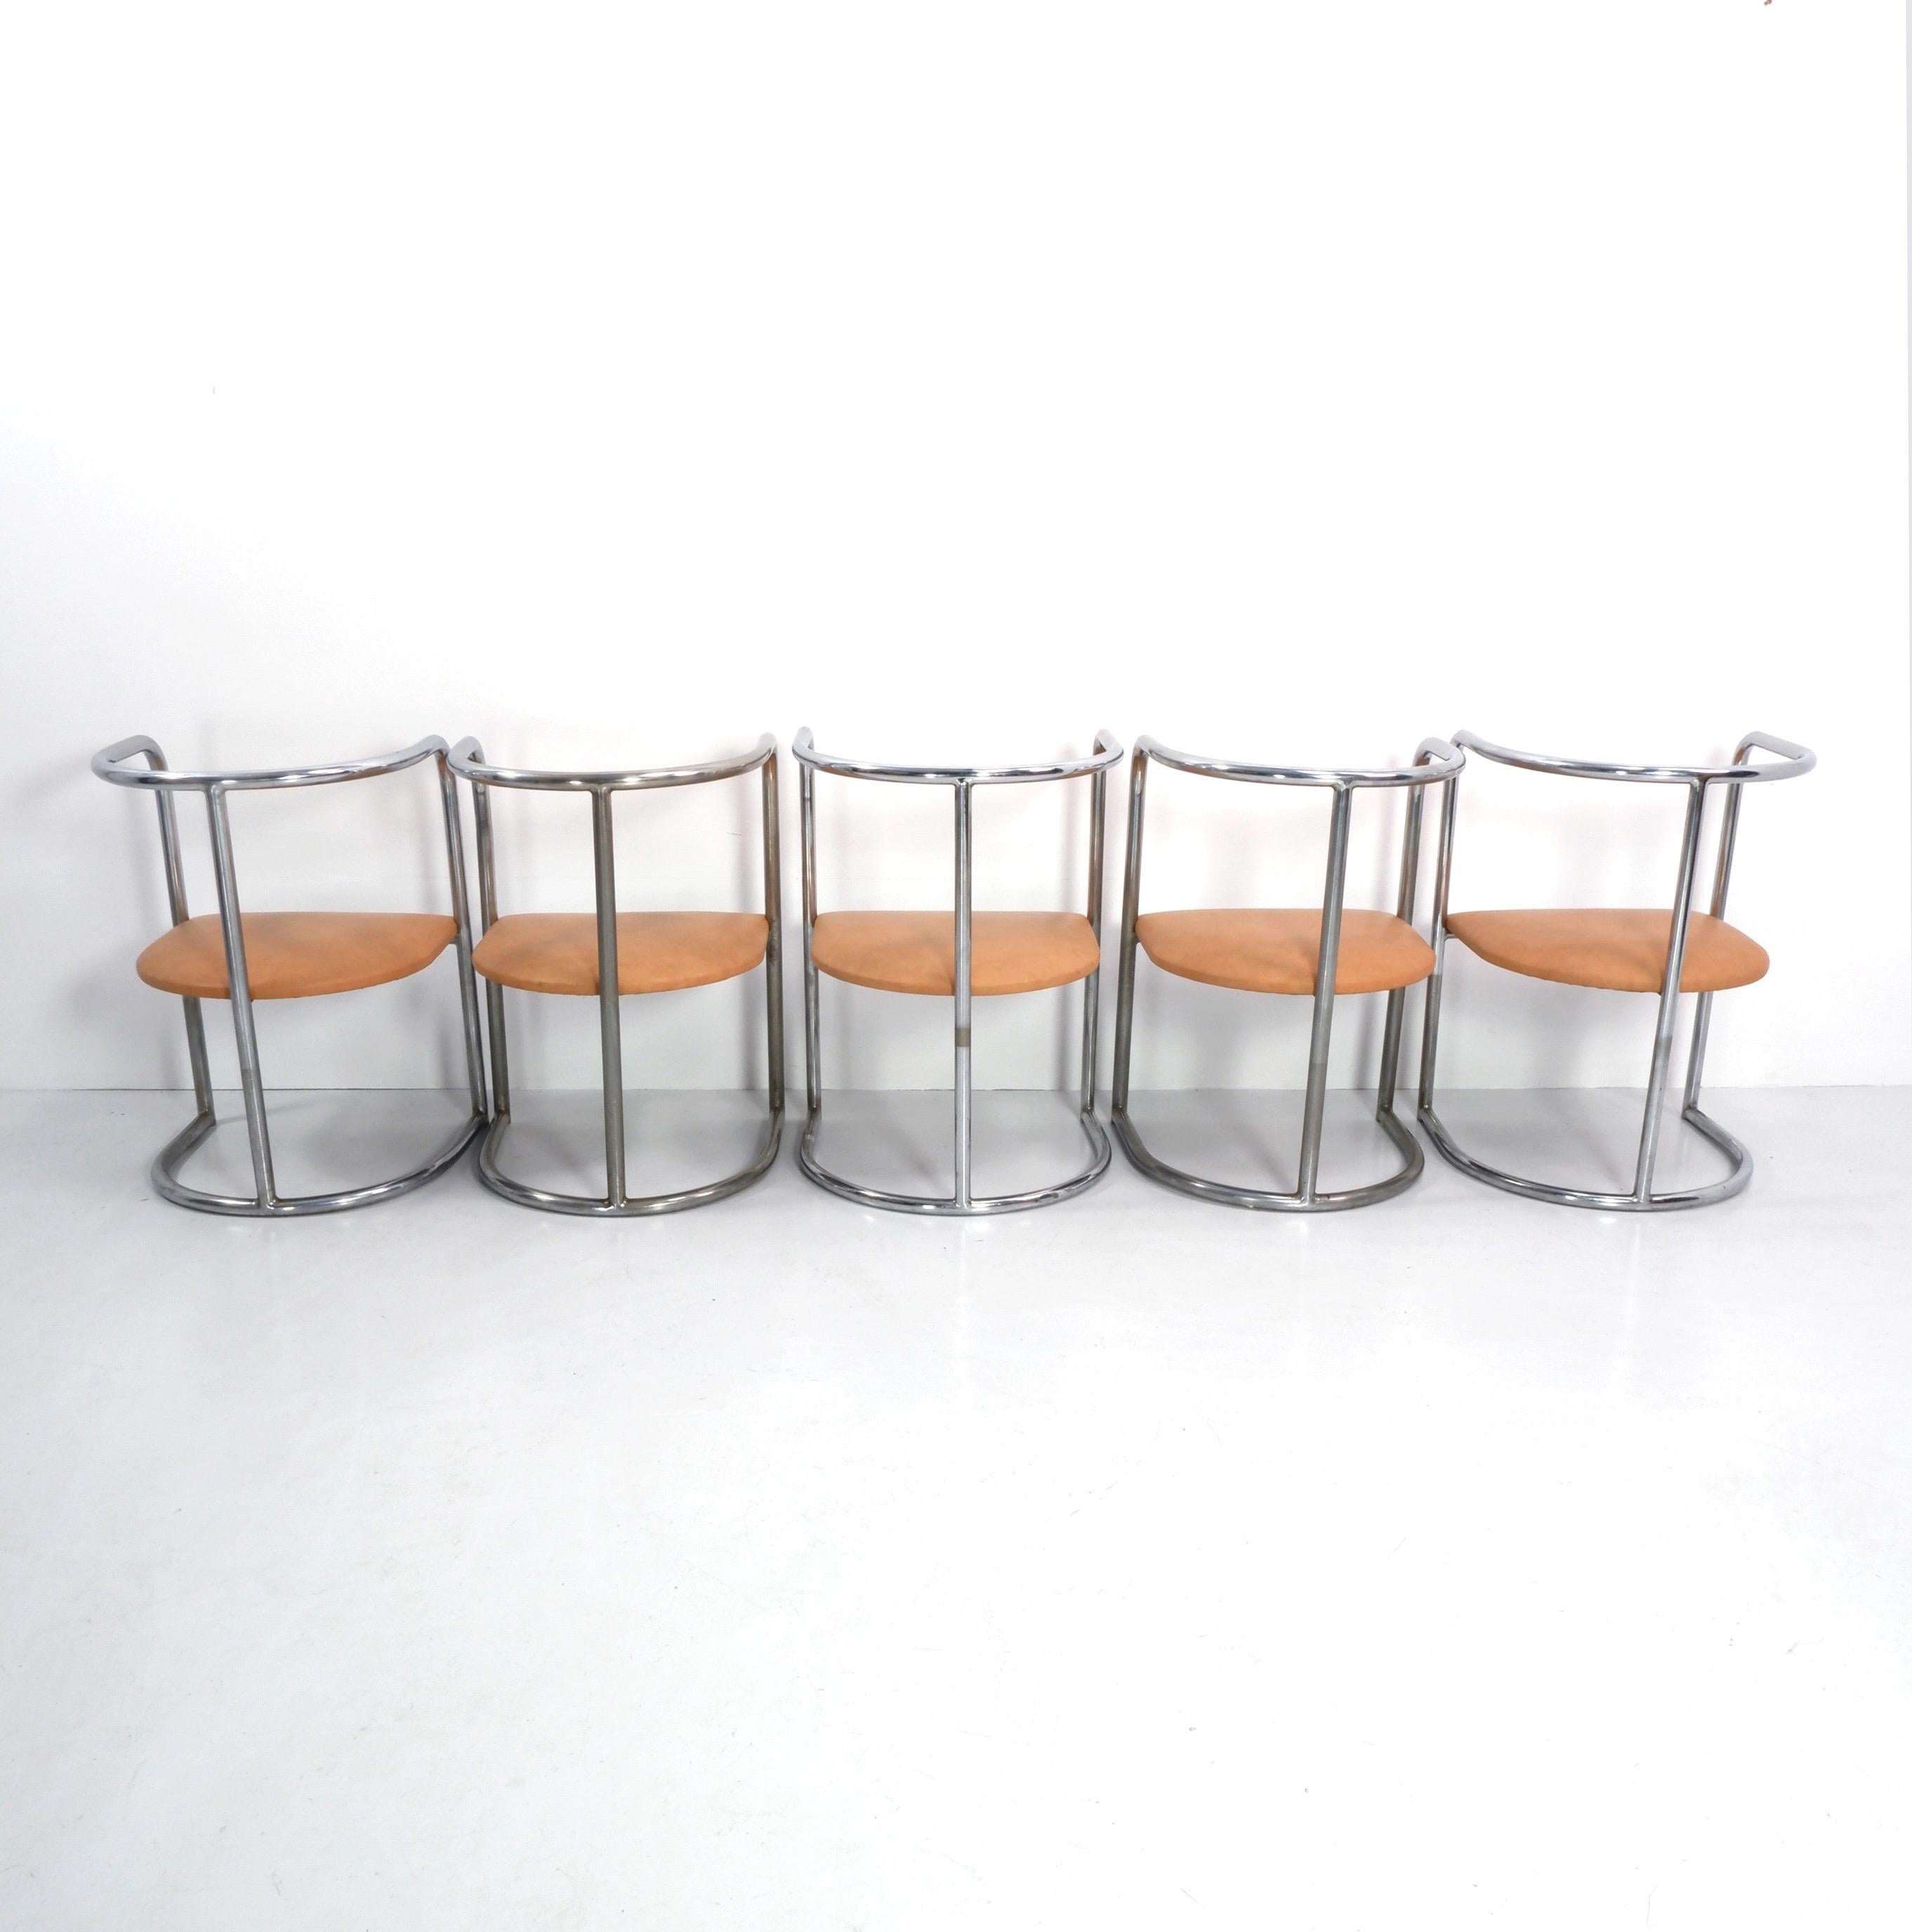 Mid-20th Century Set of 5 Tubular Dining Chairs attrb. Djo Bourgeois, France, c.1930